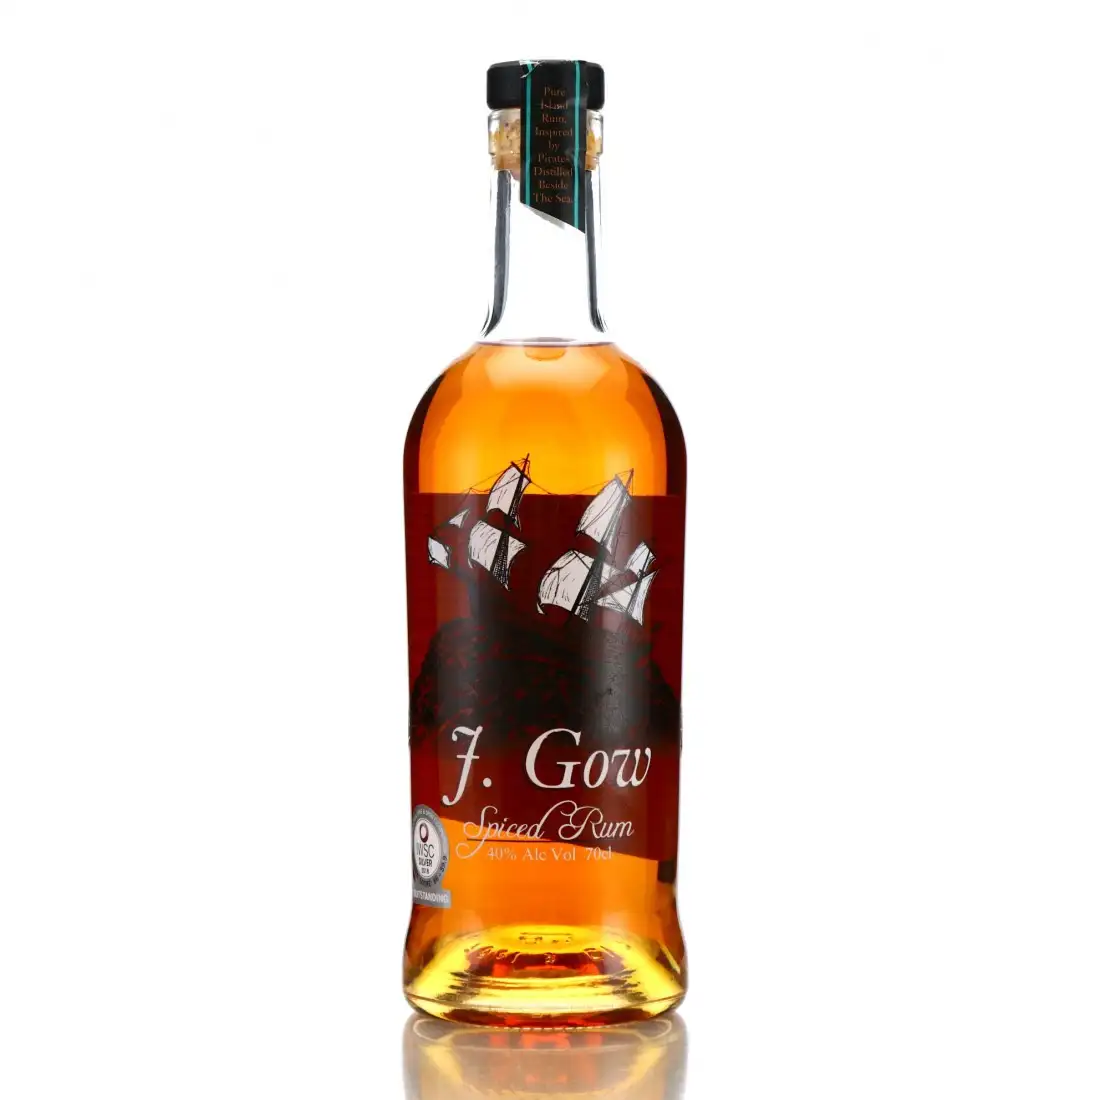 Image of the front of the bottle of the rum J. Gow Spiced Rum